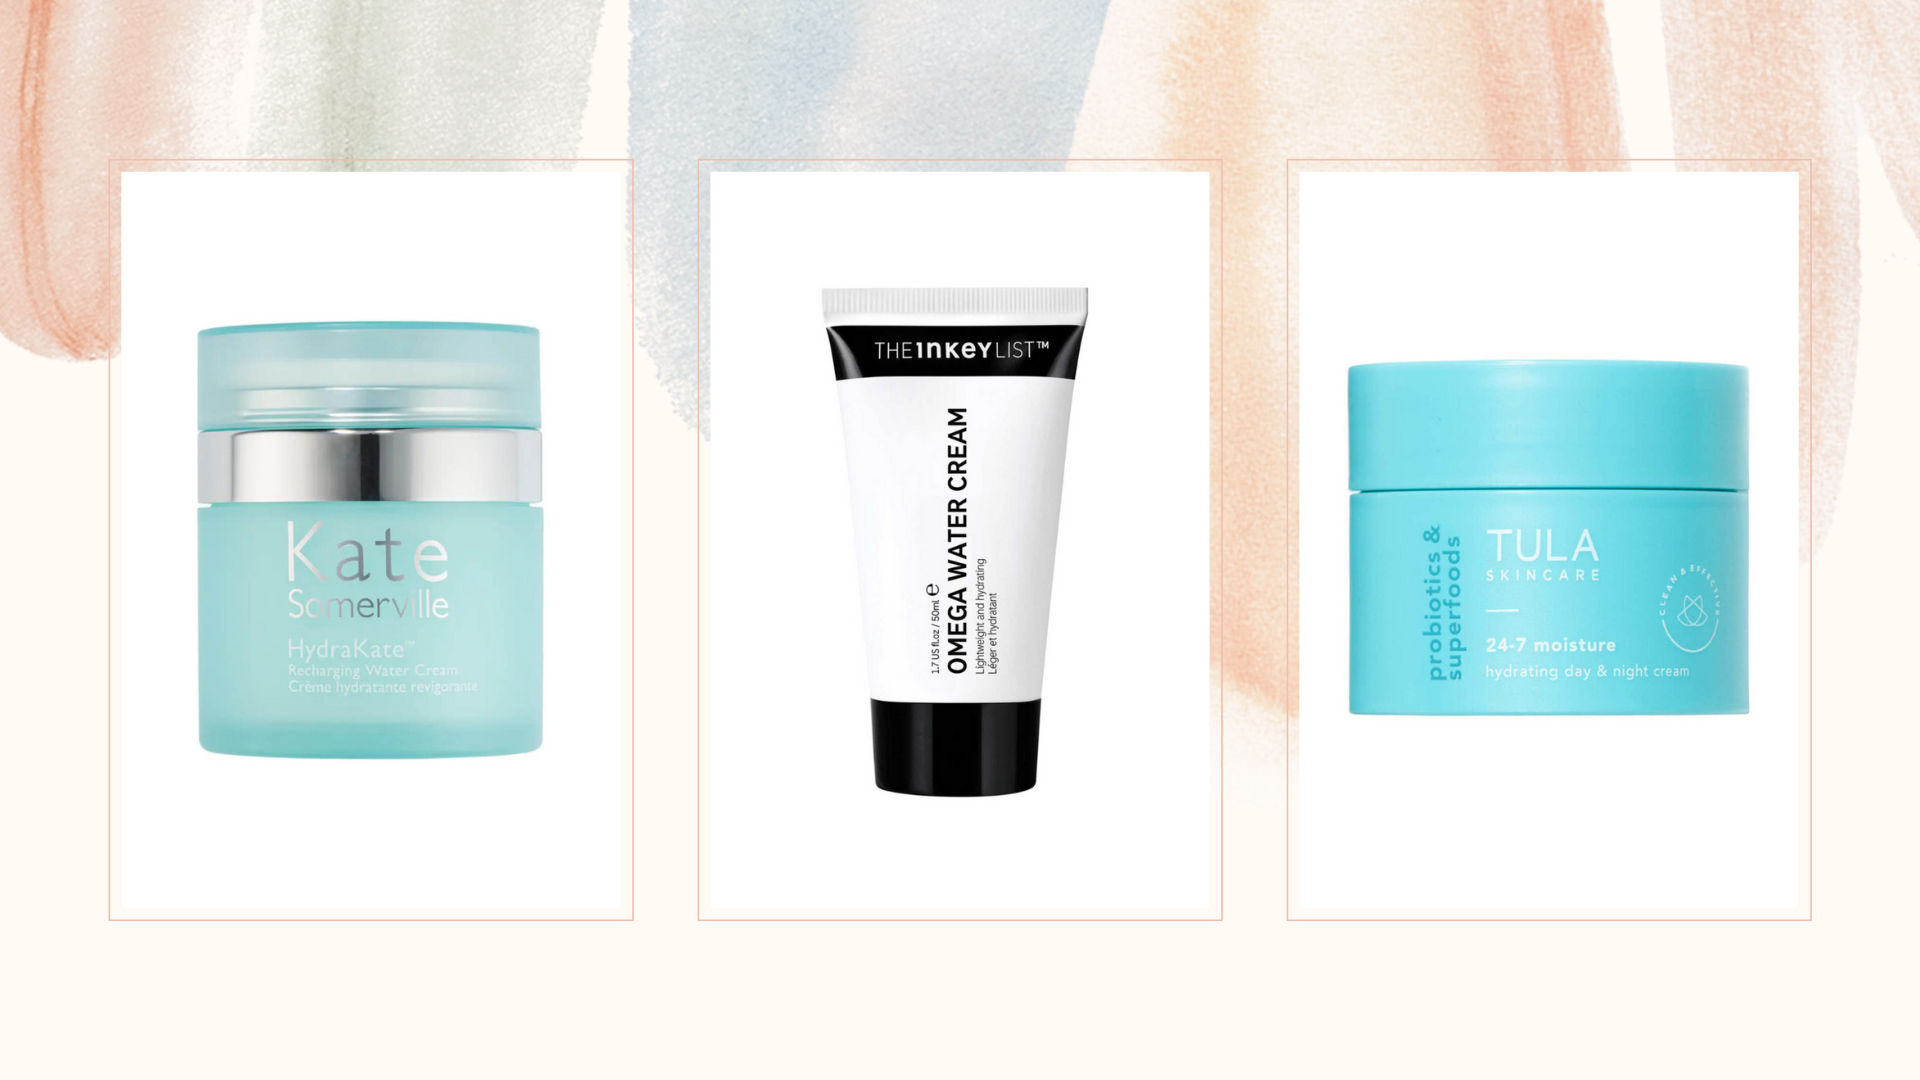 Best night cream for oily skin to leave you glowy not greasy